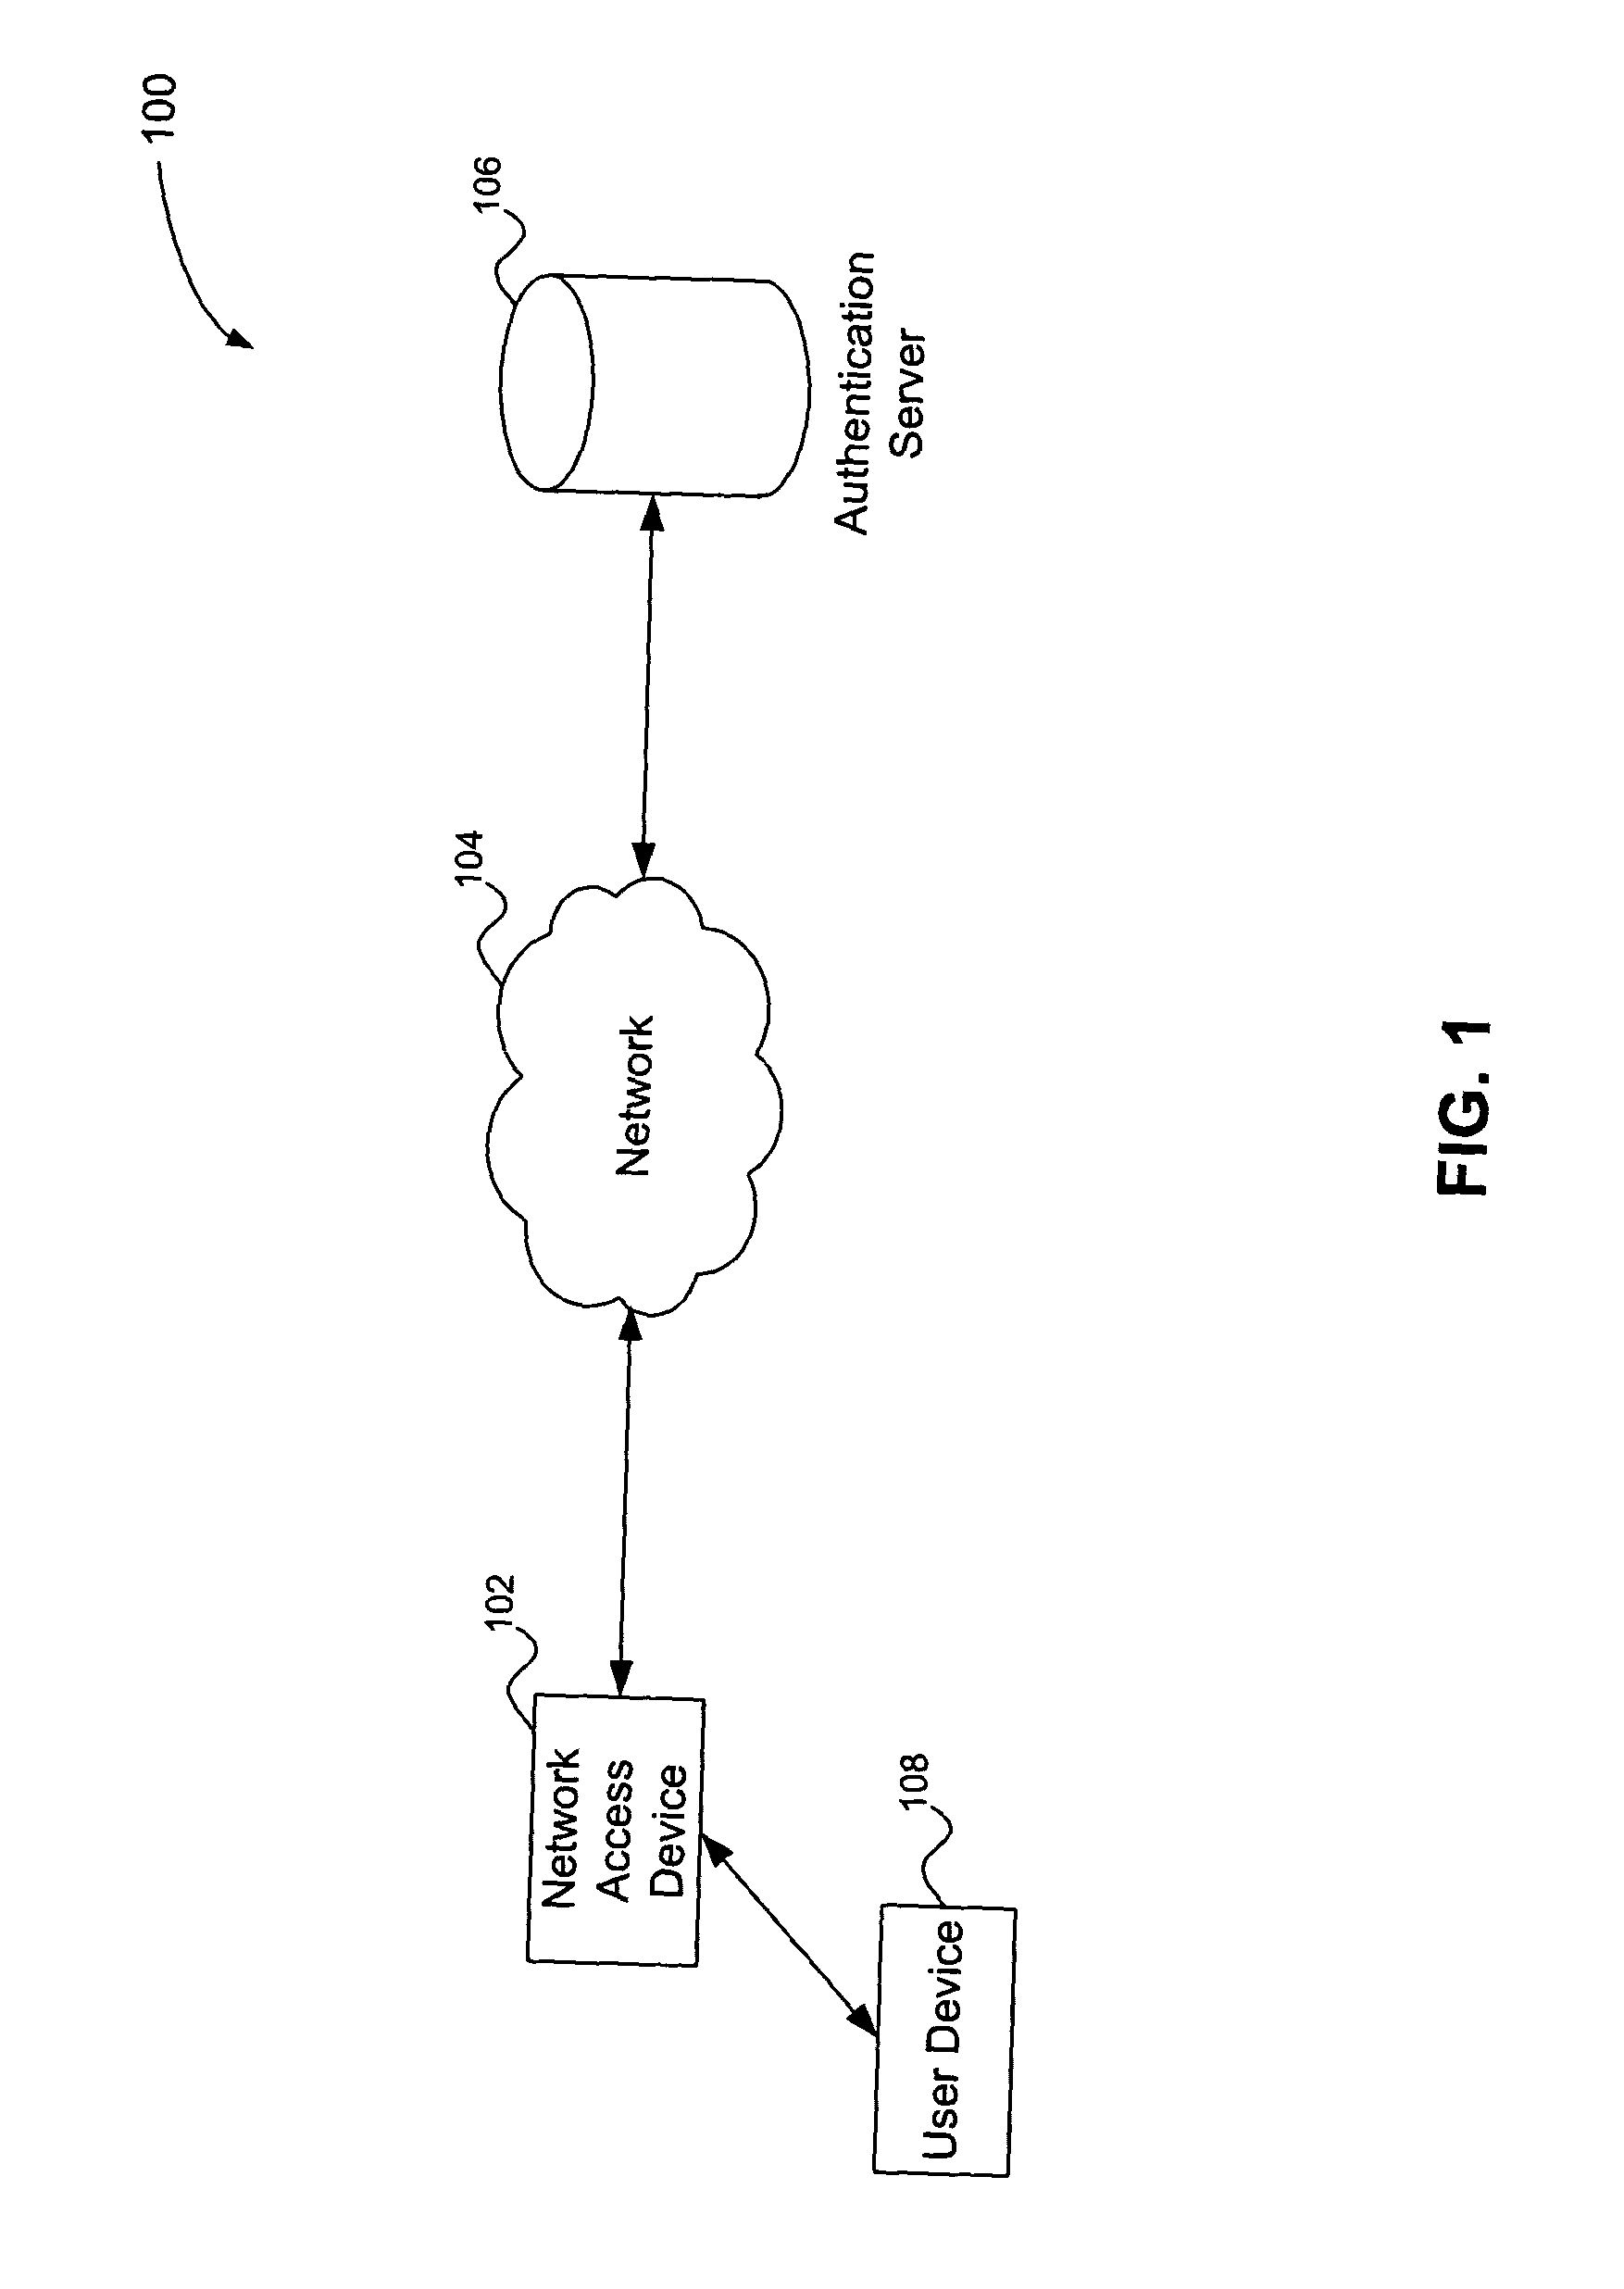 Multiple tiered network security system, method and apparatus using dynamic user policy assignment